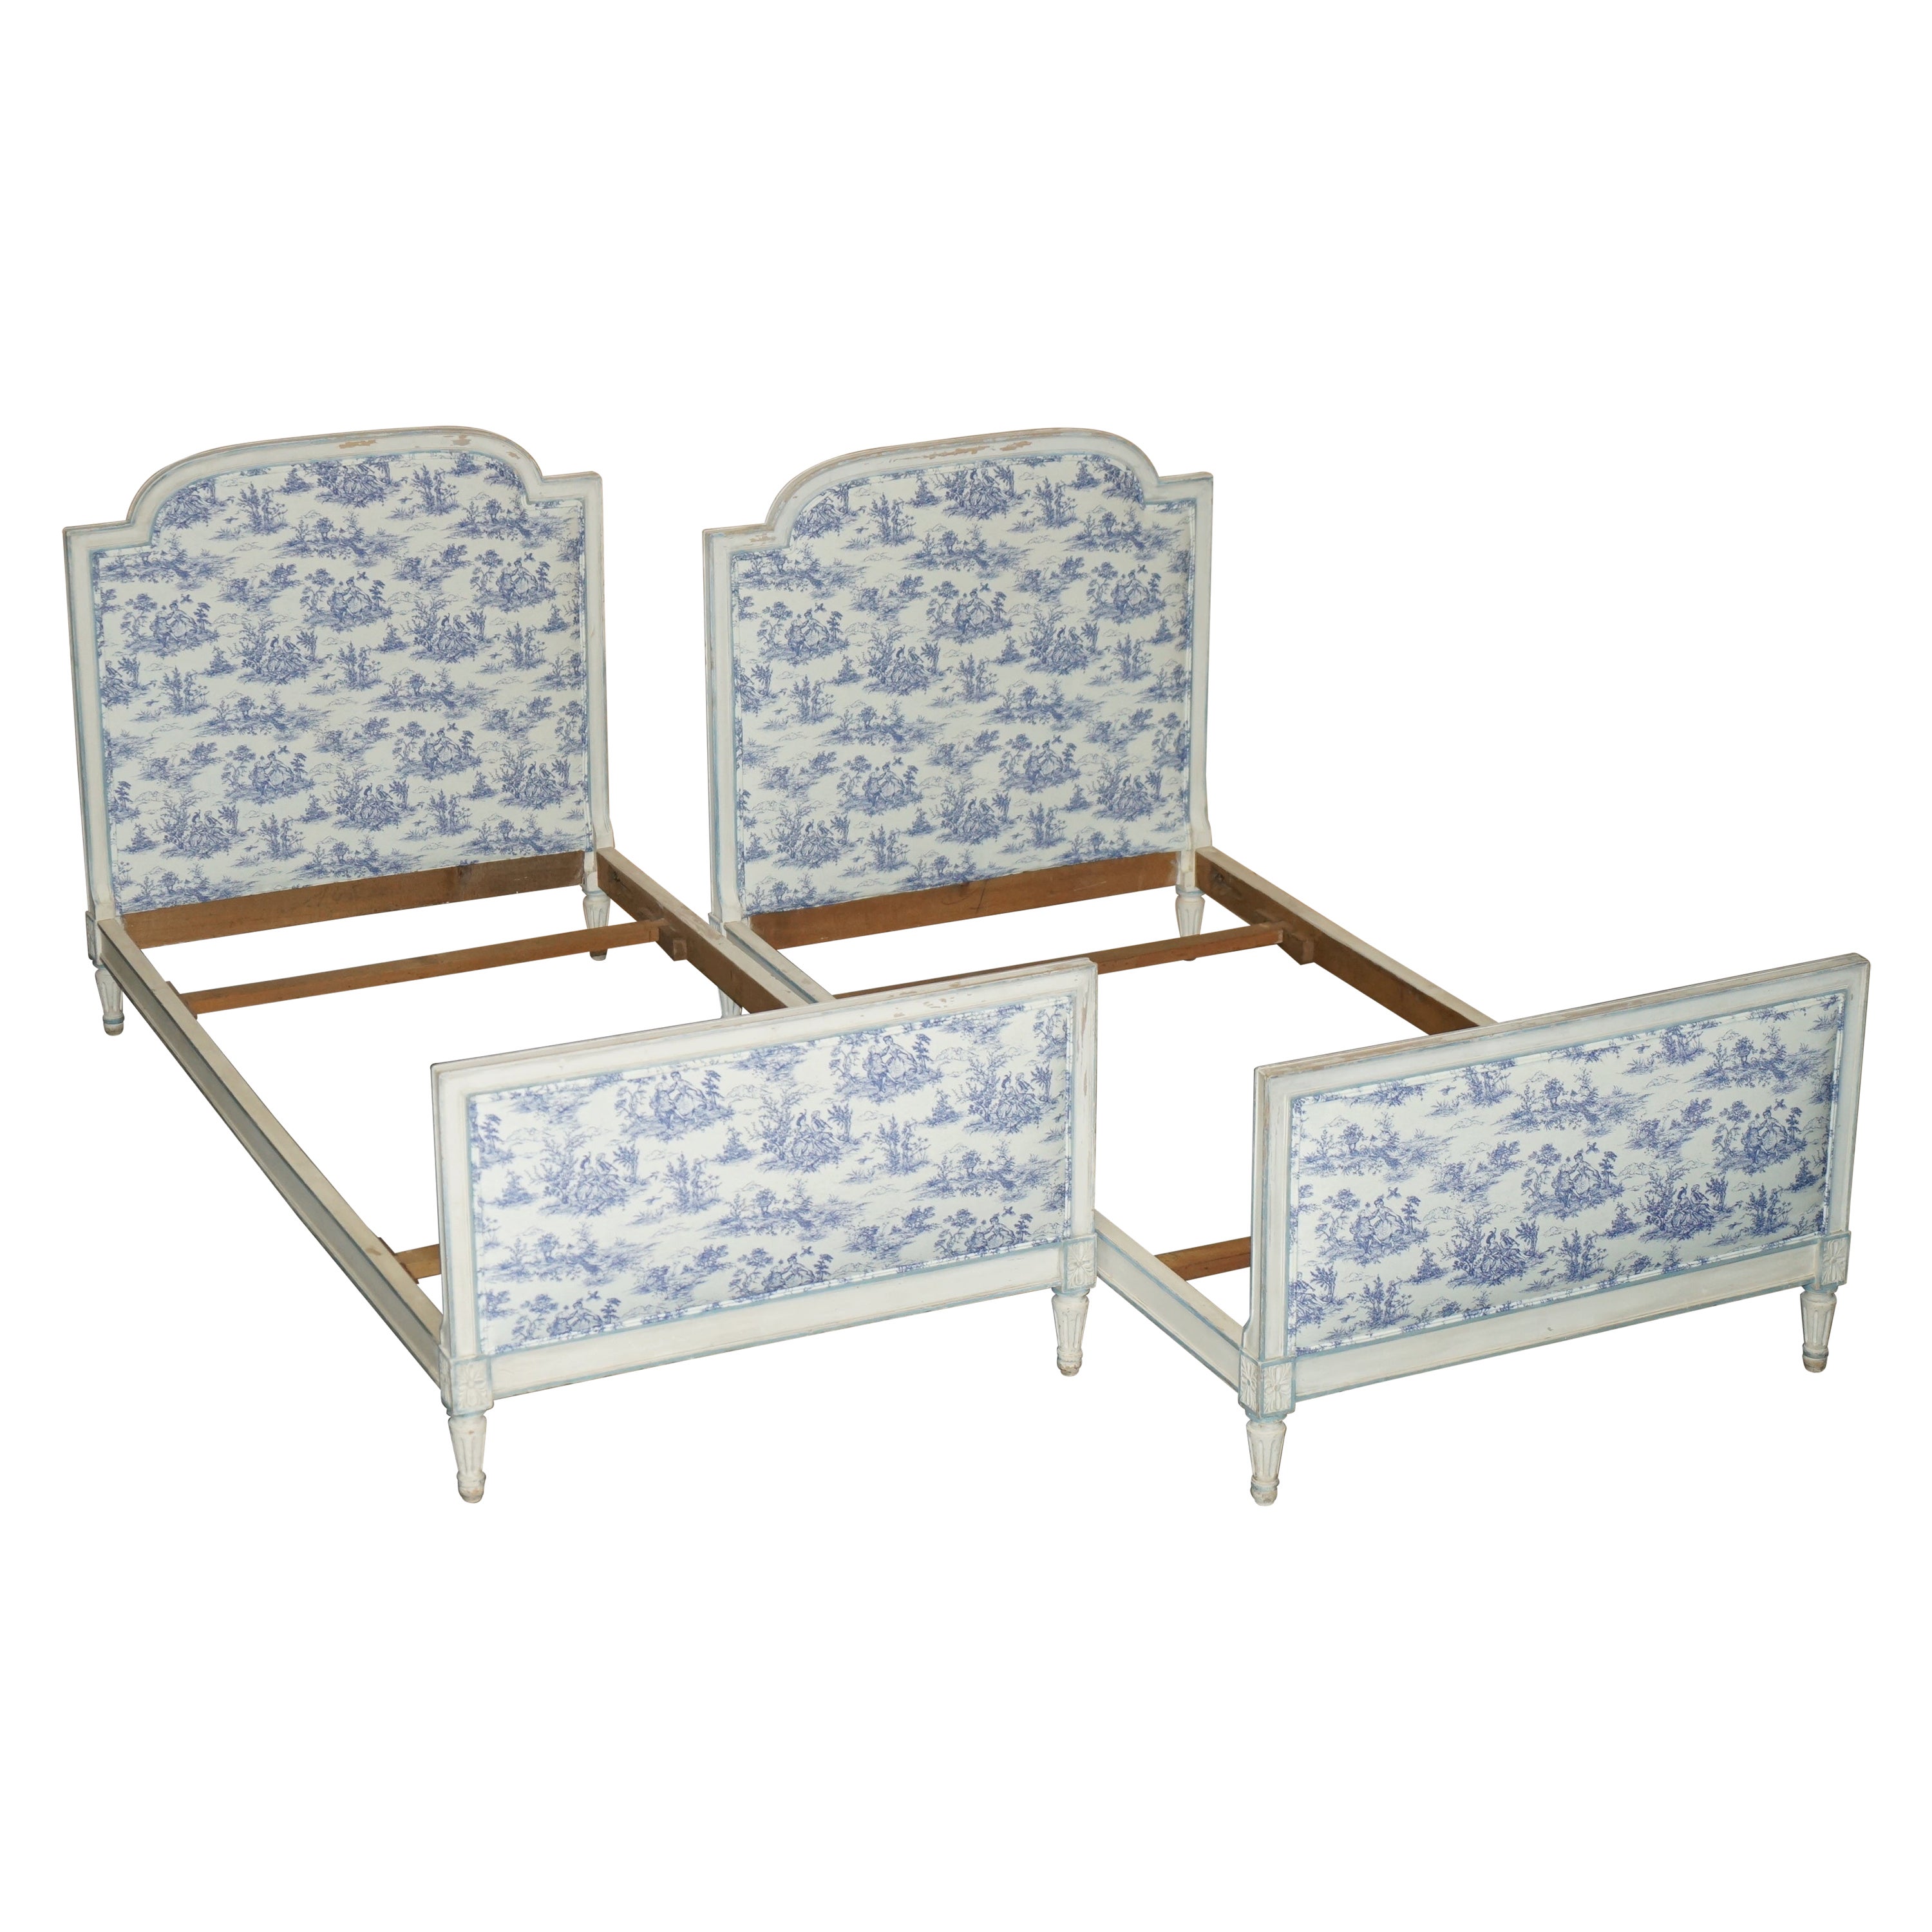 PAIR OF ANTIQUE FRENCH SiNGLE BEDSTEAD FRAMES WITH TOILE DE JOUY UPHOLSTERY For Sale